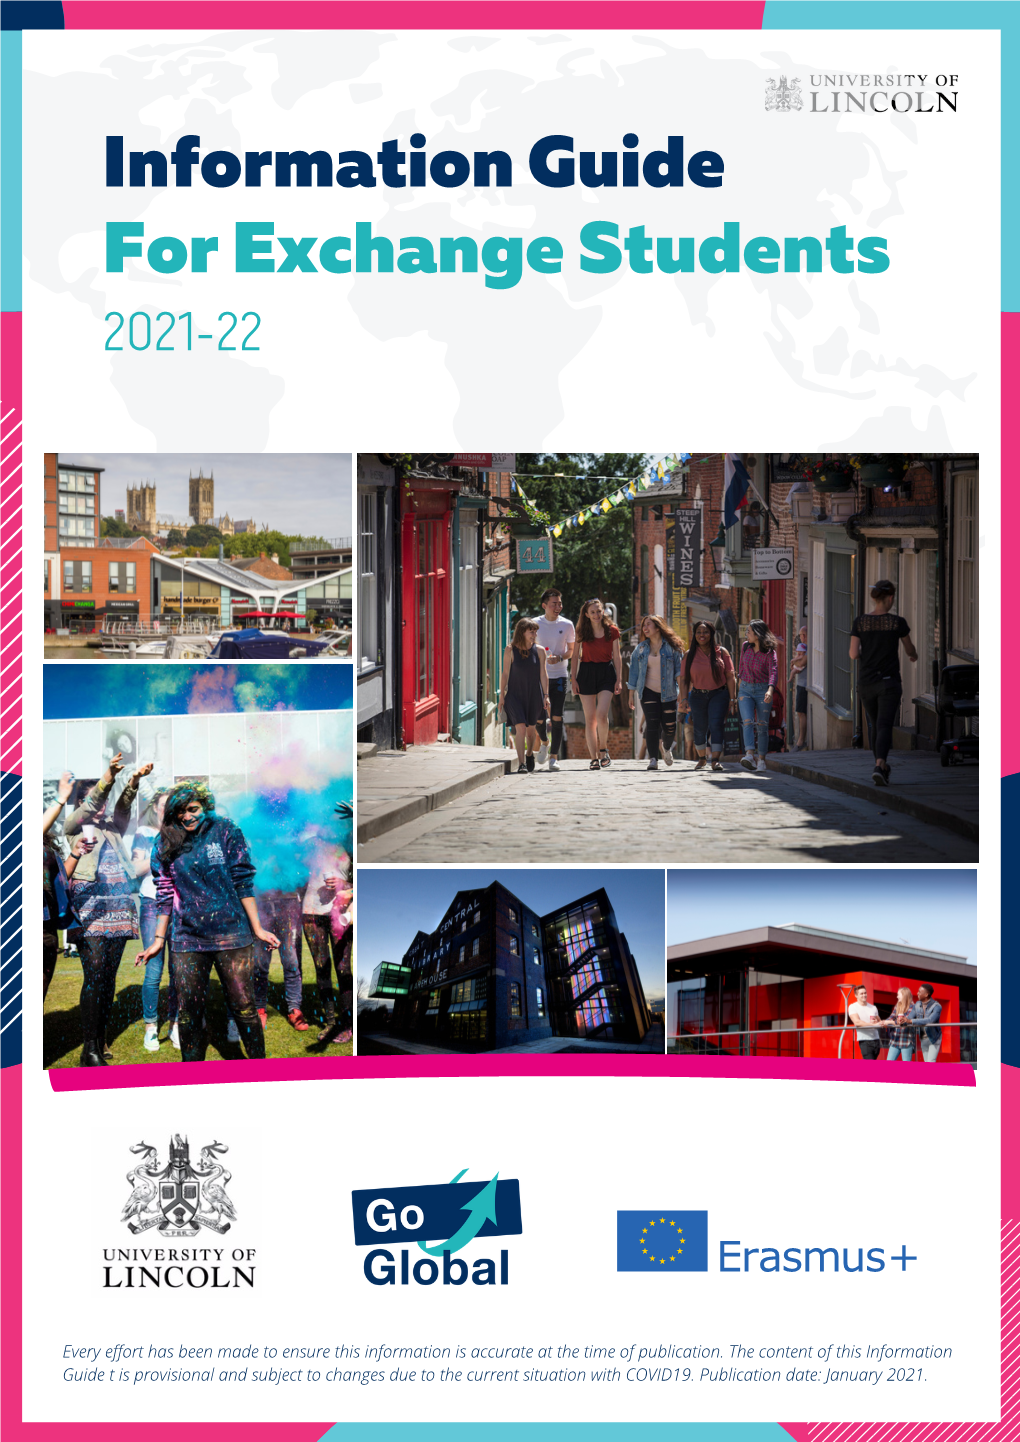 Information Guide for Exchange Students 2021-22